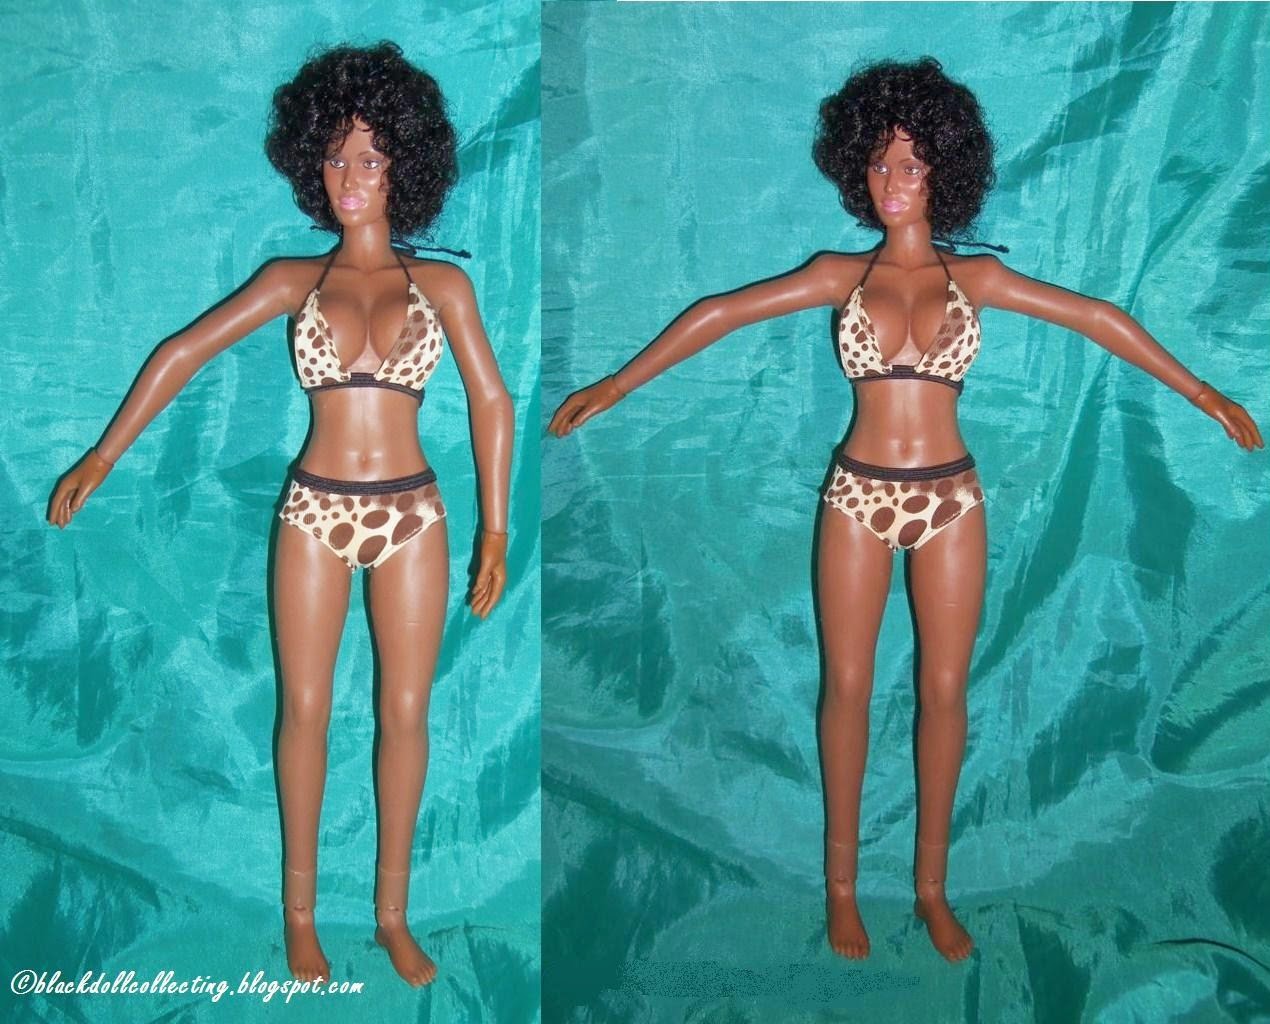 Black Doll Collecting: Assessment of First Phicen